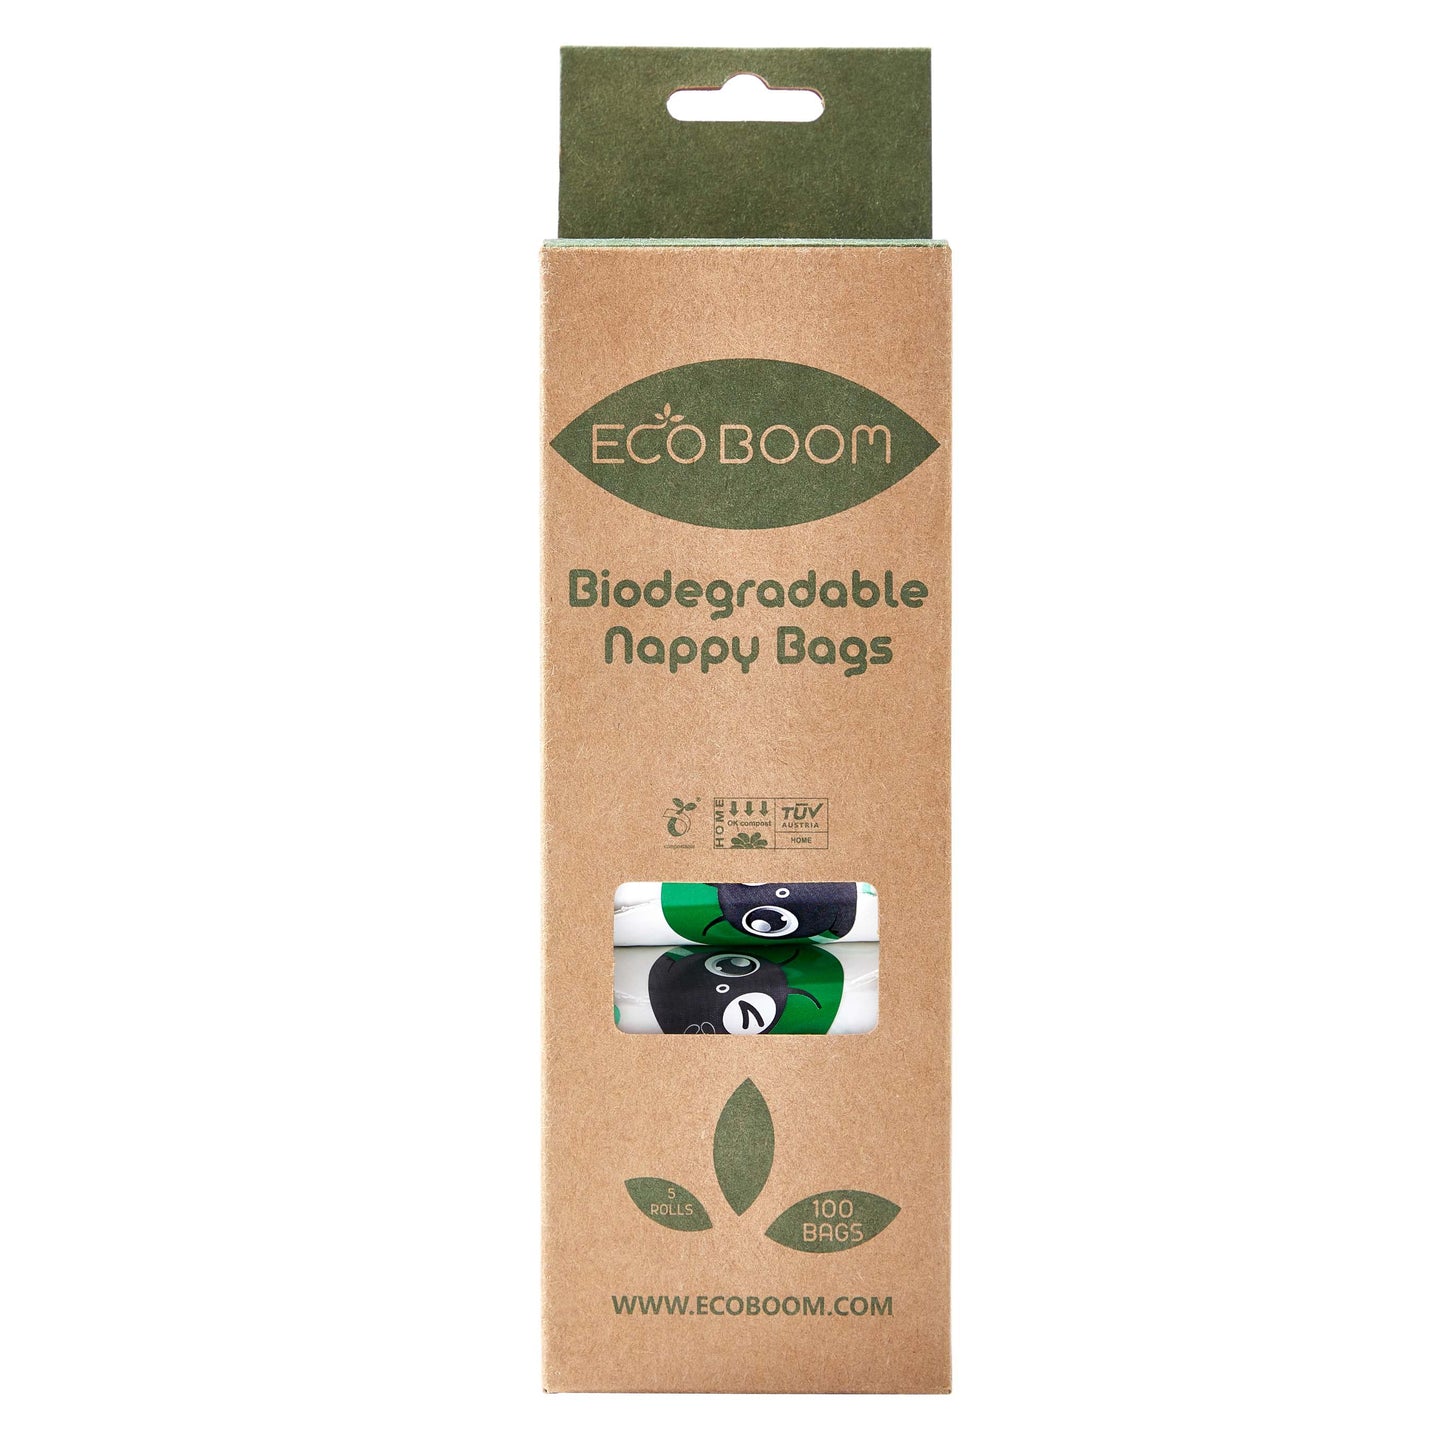 Biodegradable Nappy Bags (100)